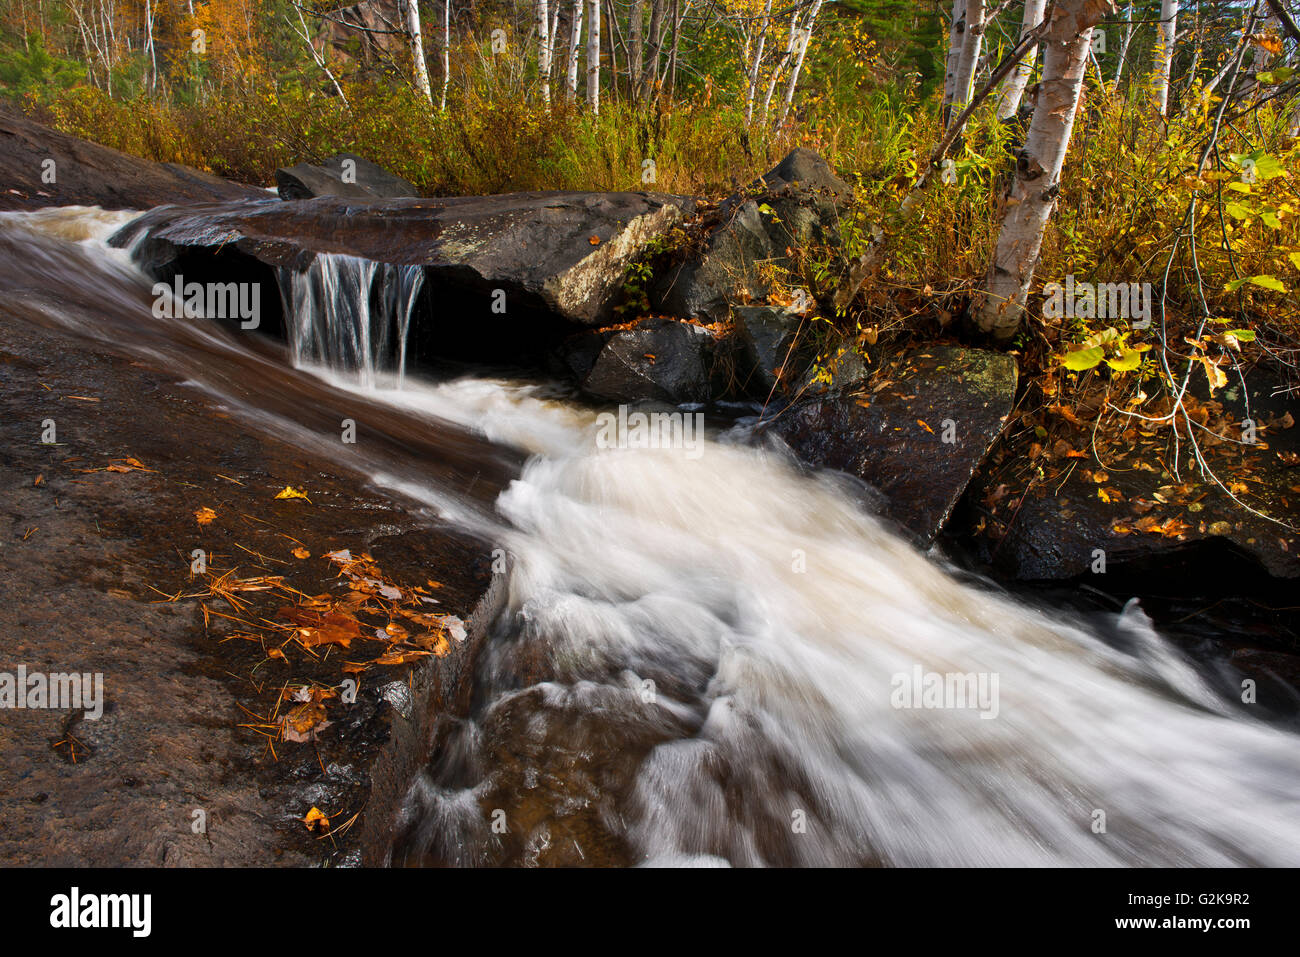 Affluente del Fiume Onaping Onaping Falls Ontario Canada Foto Stock